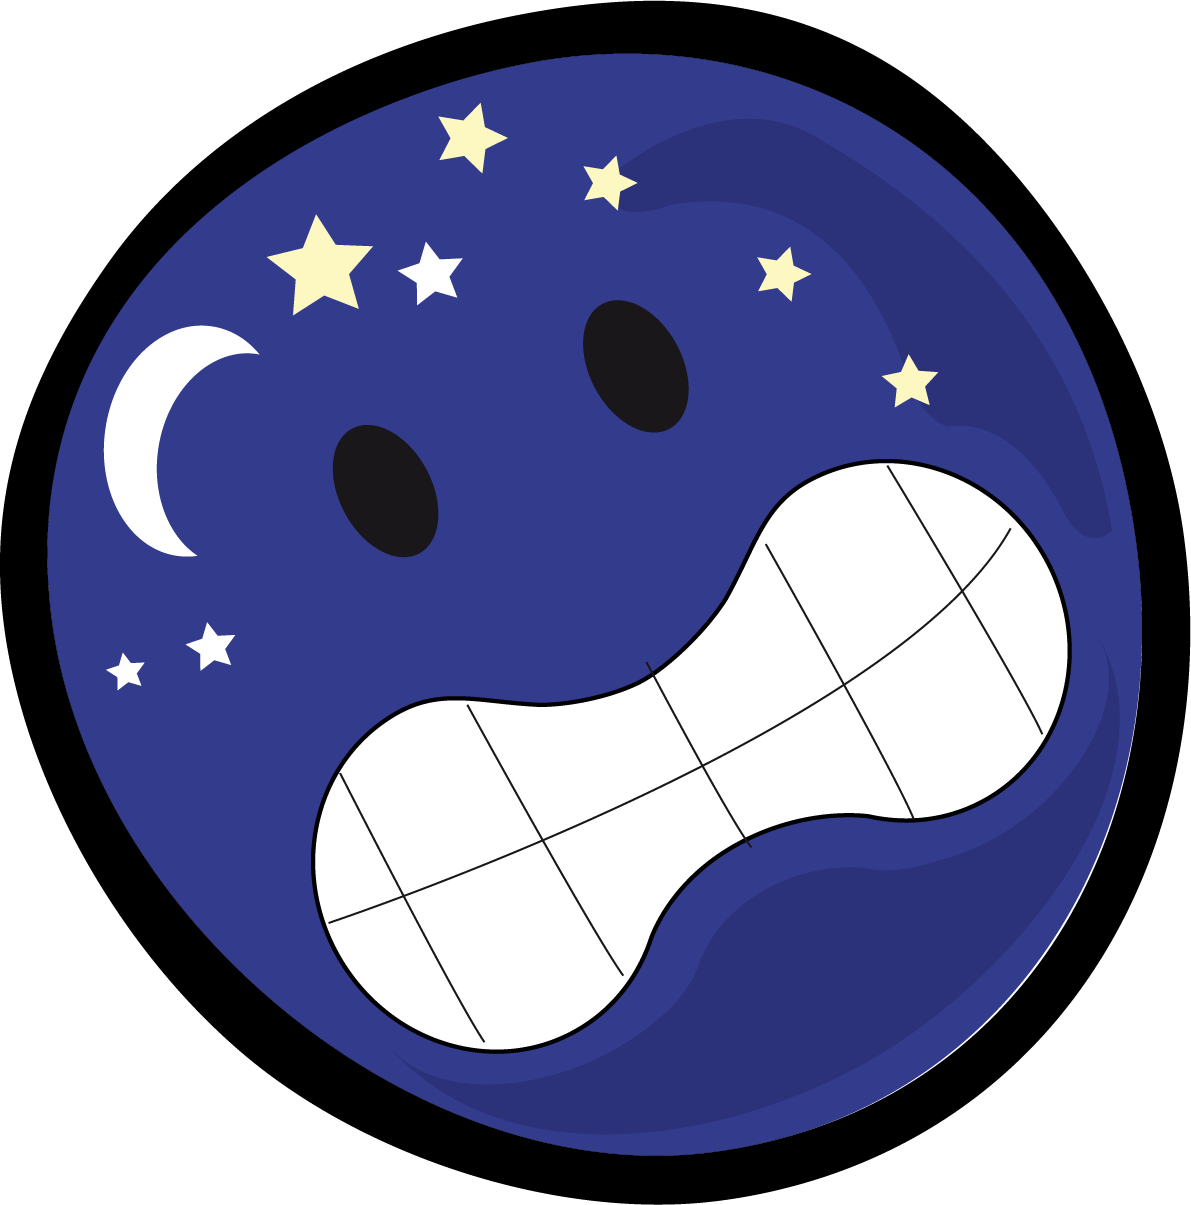 Night smiley clipartly comclipartly. Good clipart content face